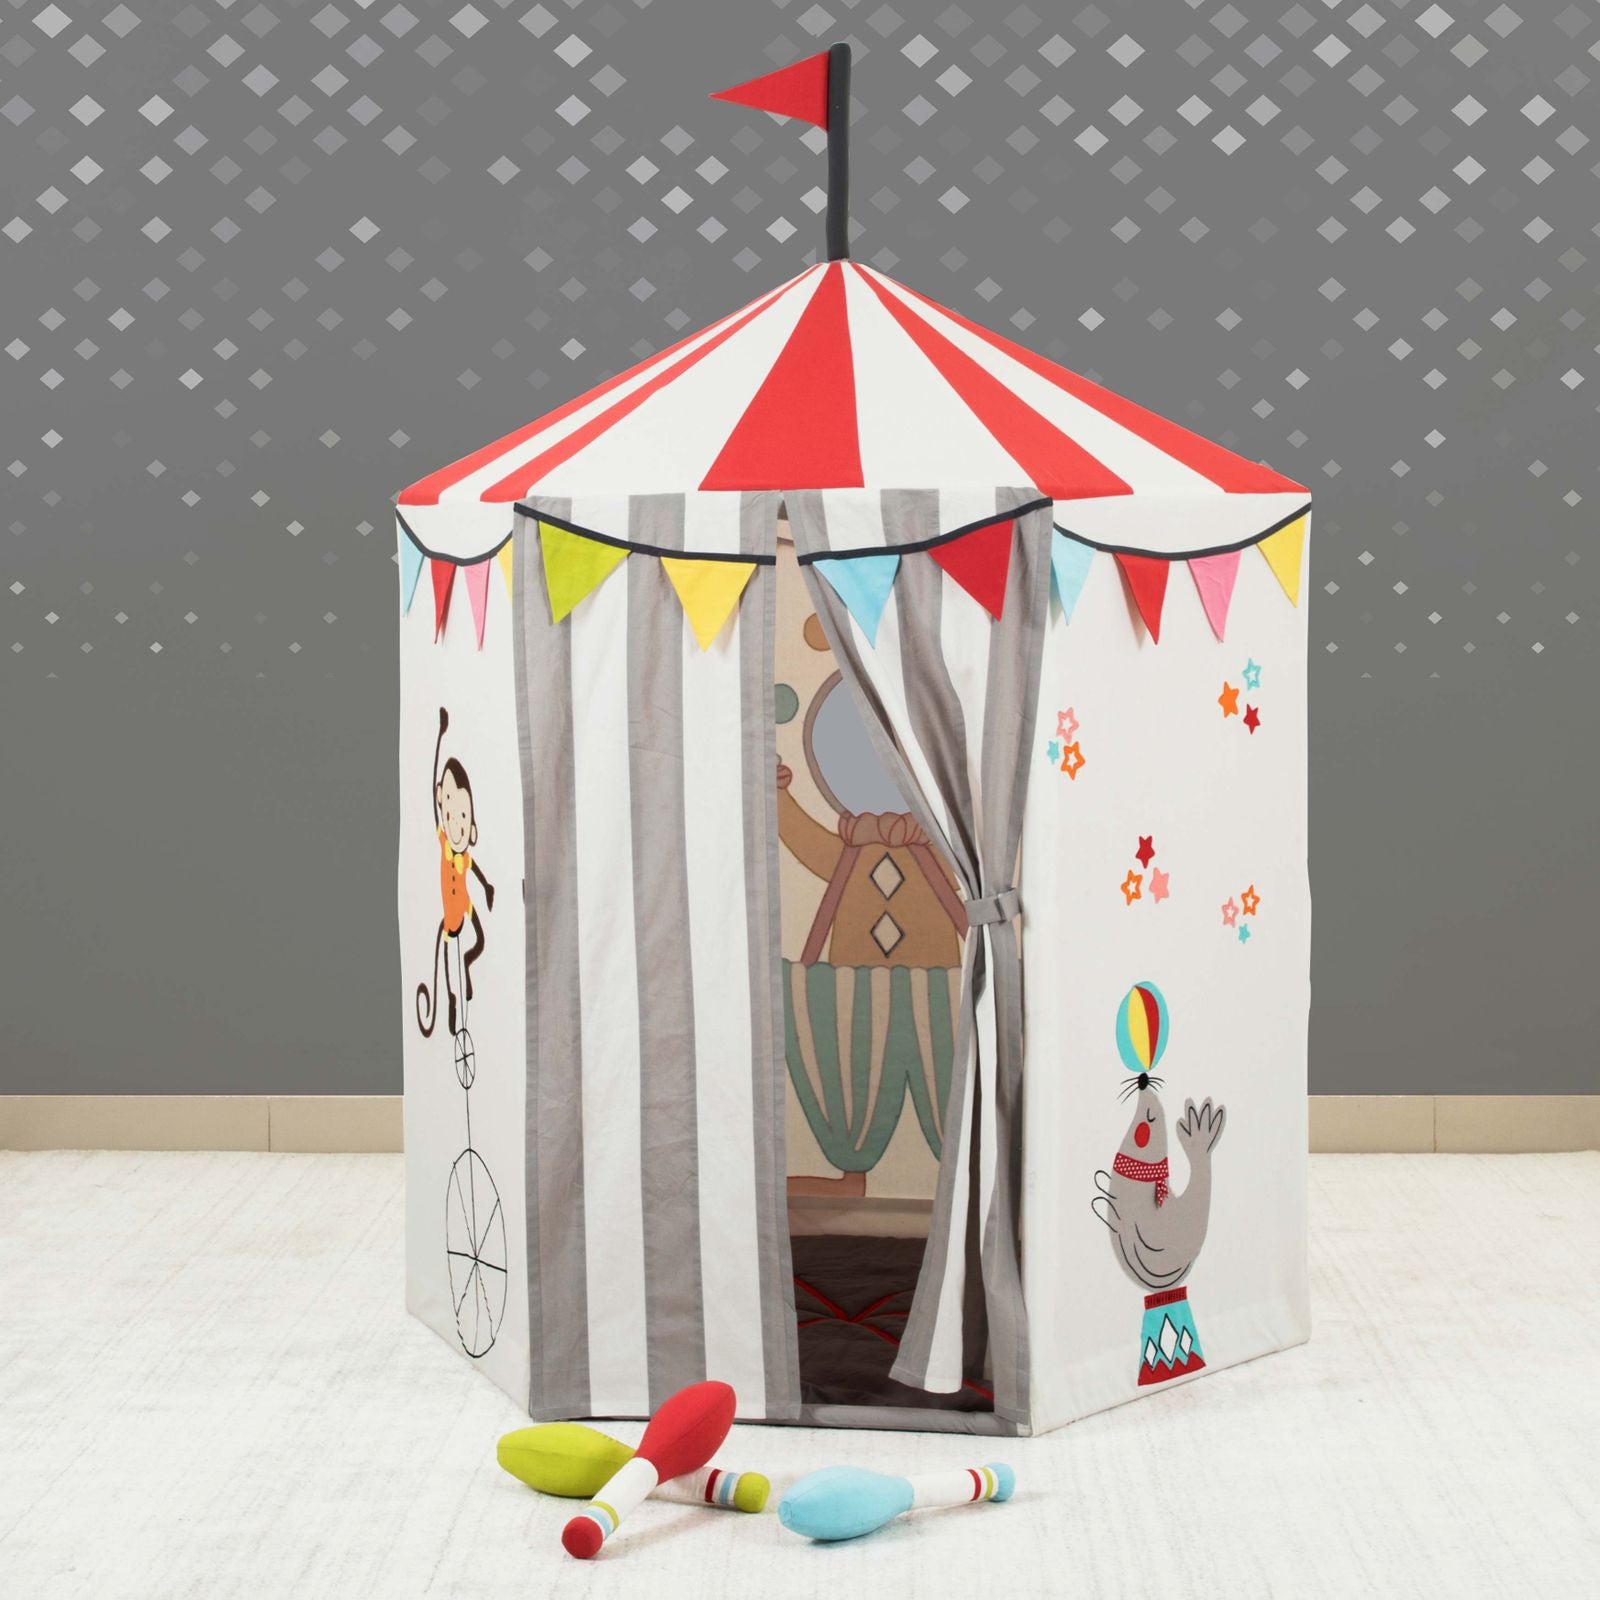 Role Play Role Play Circus Tent Play Home